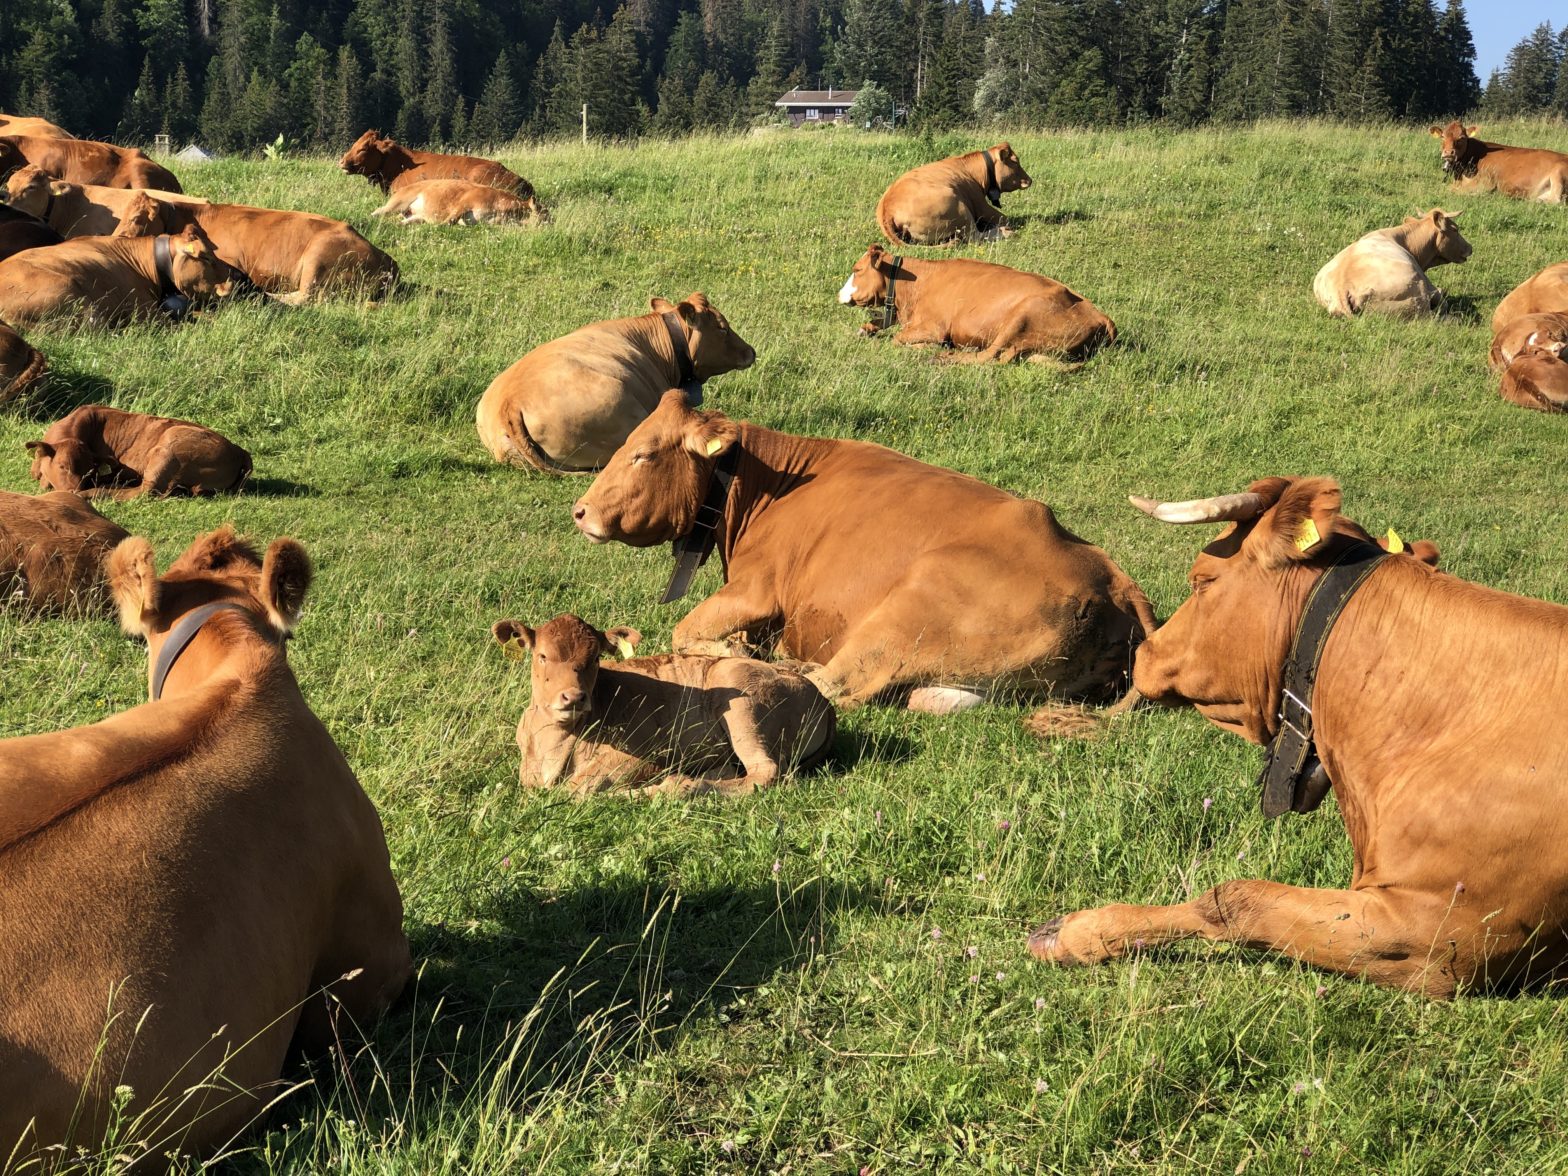 Relaxing Cows – The Right Crowd To Be With During A Pandemic